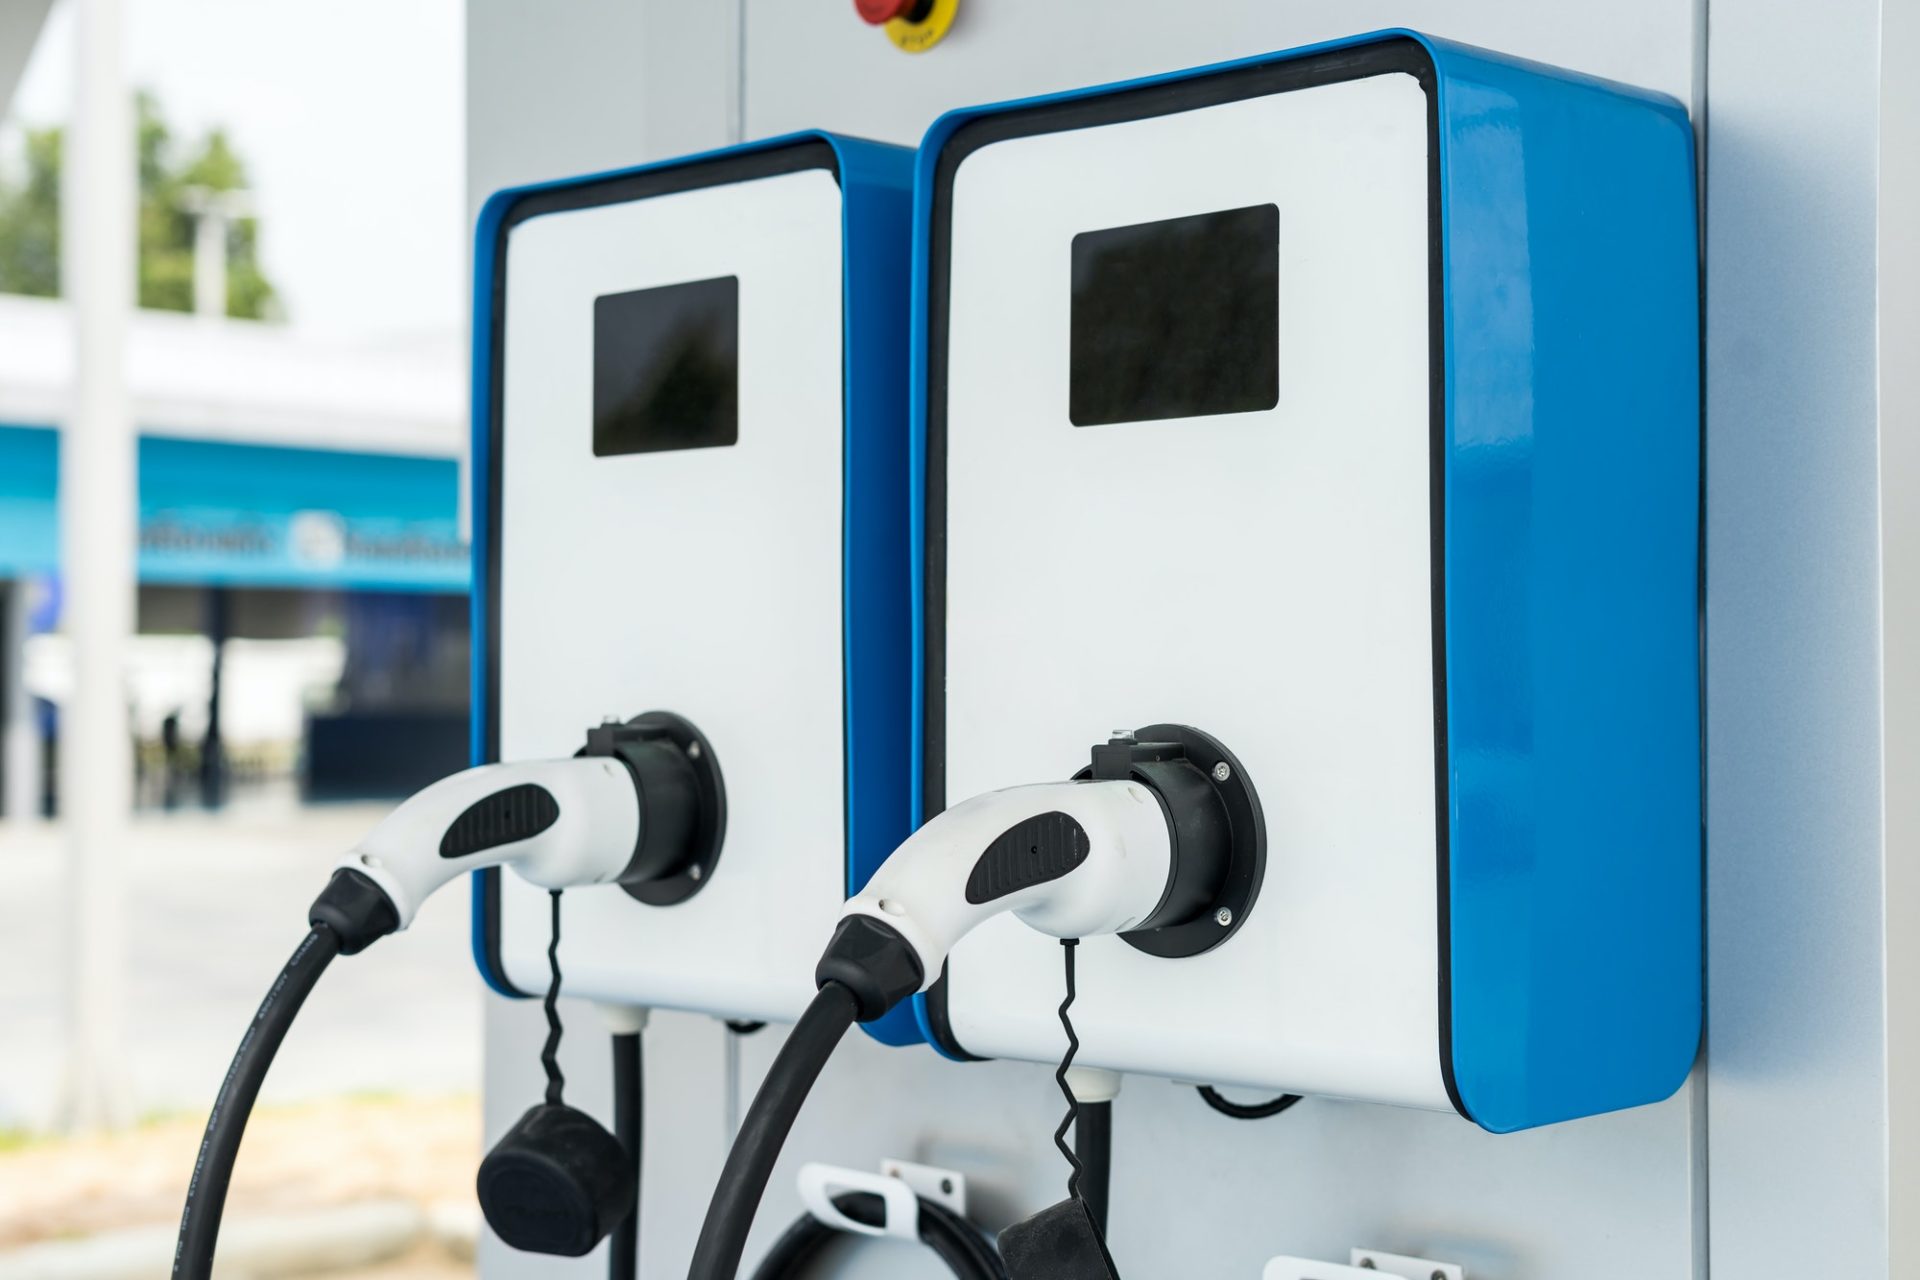 Electric Vehicle Charging Station Market Is Booming